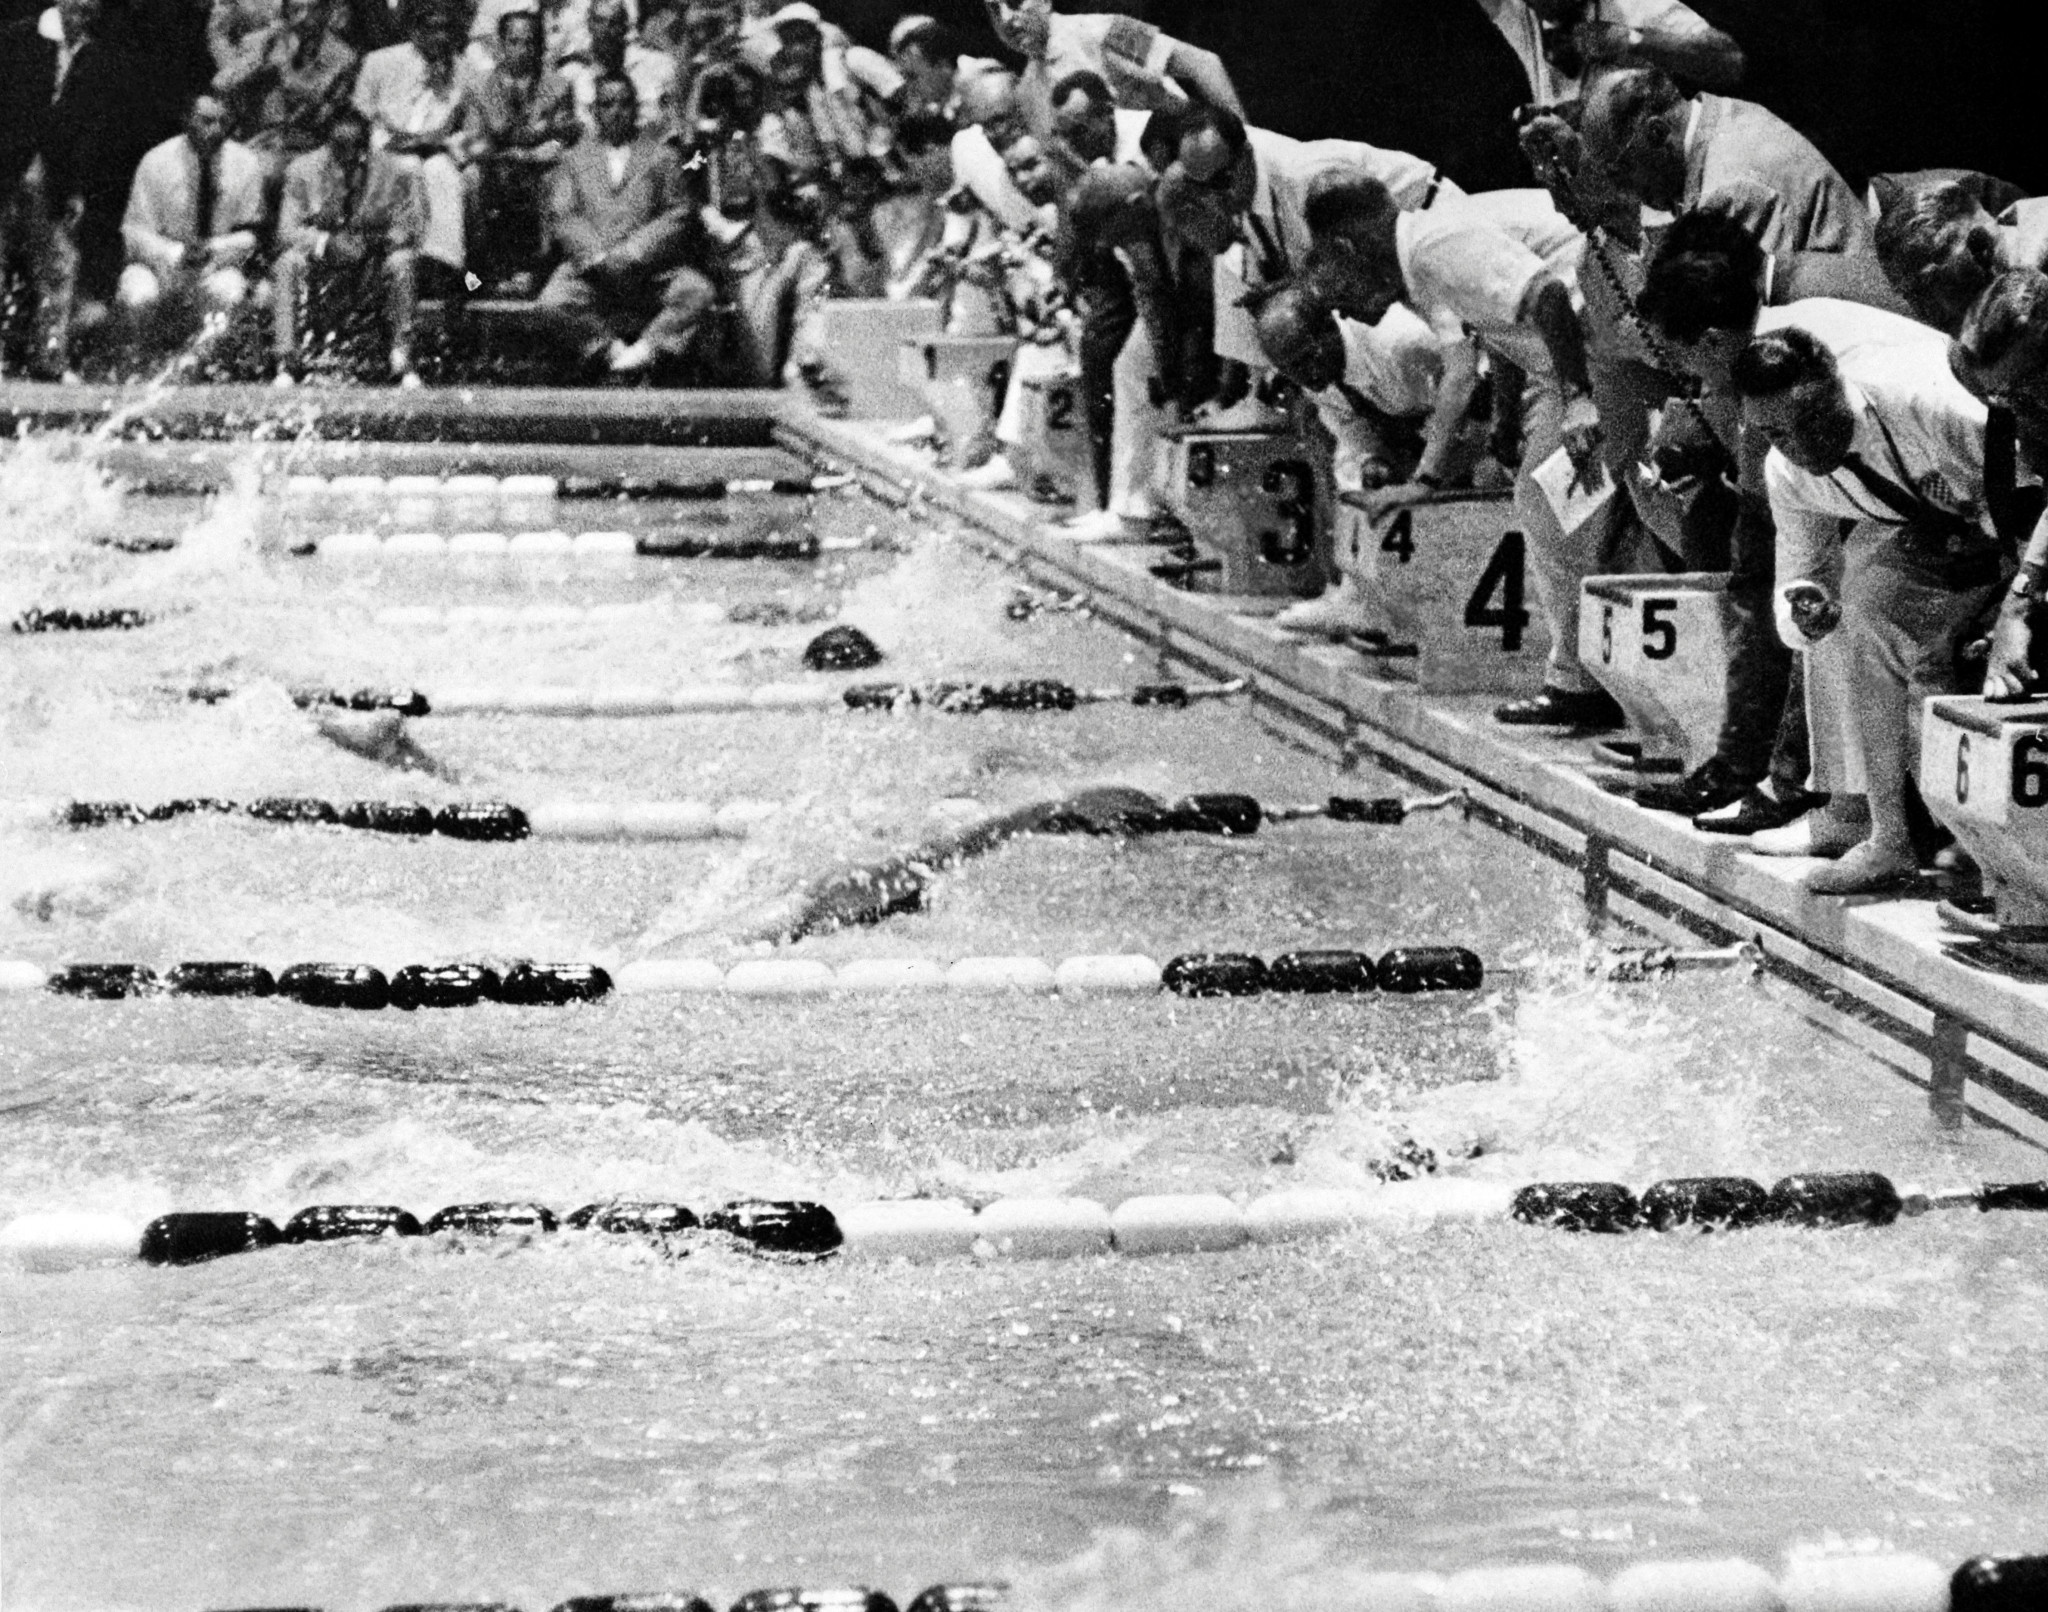 John Devitt and Lance Larson touched almost simultaneously in the 1960 men's 100m freestyle final in 1960 but Devitt was given the verdict ©Getty Images